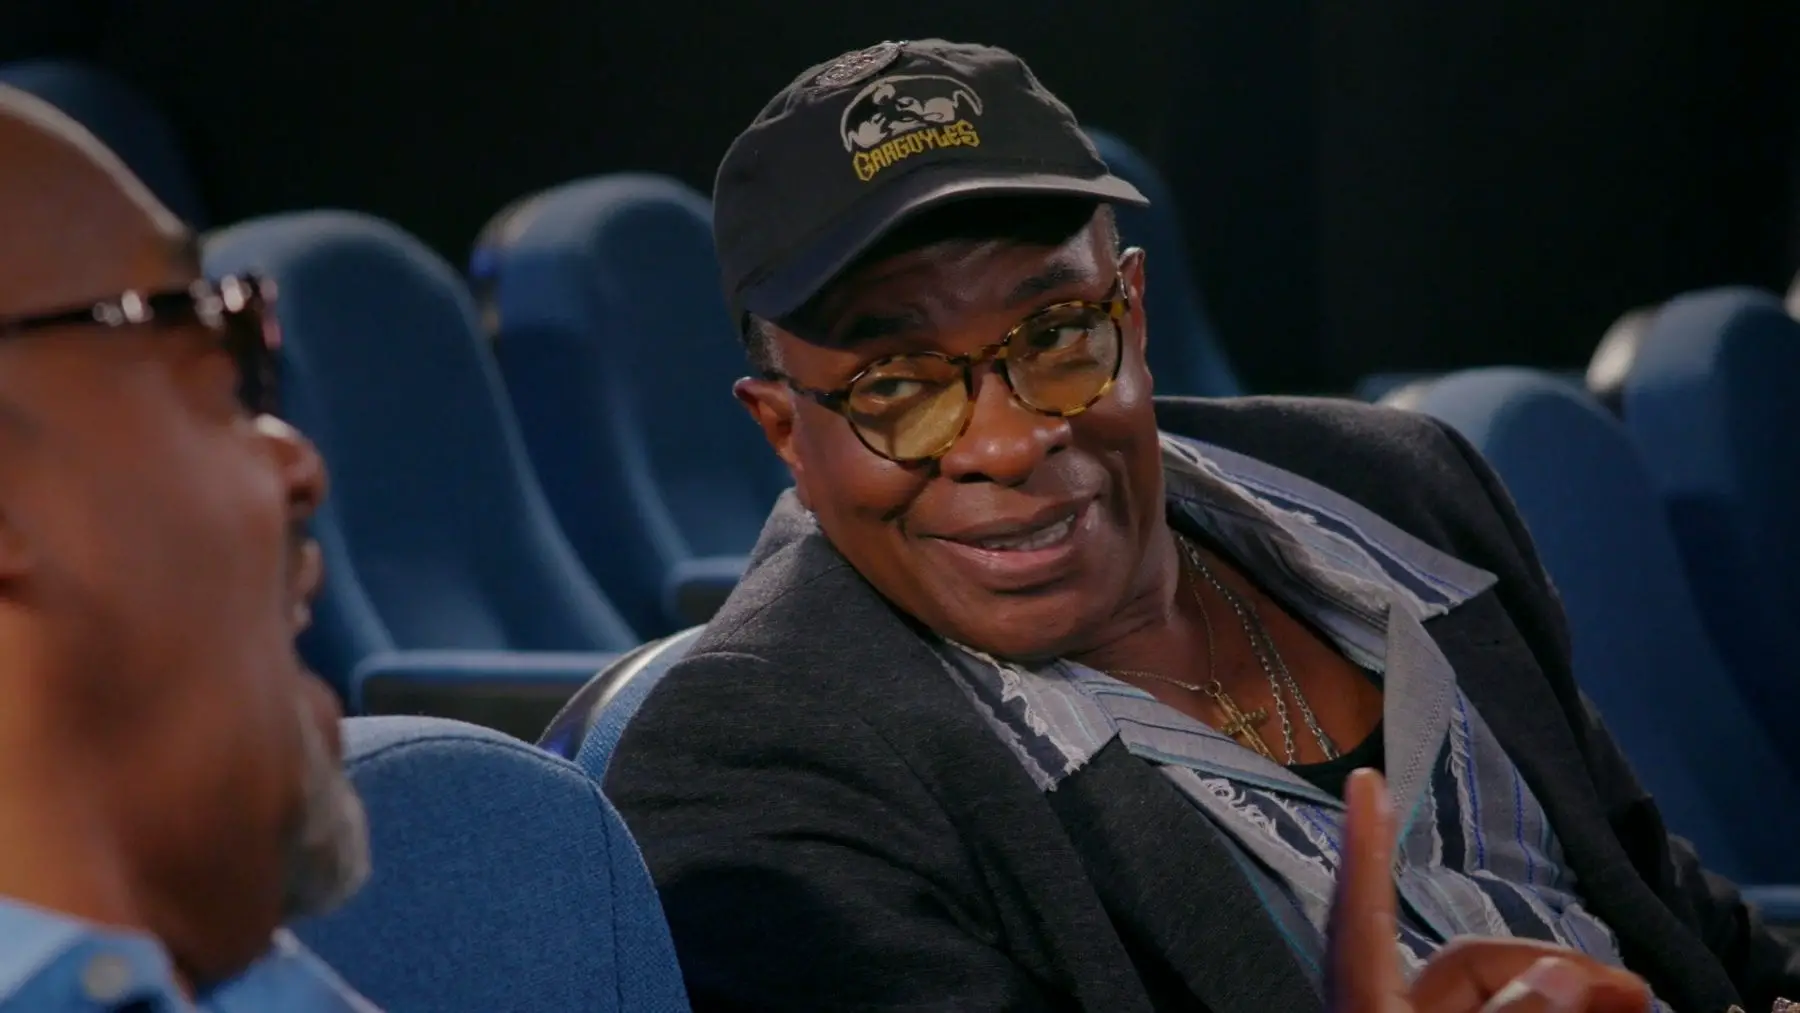 Keith David discussing his experiences in horror filmmaking in an empty theater.